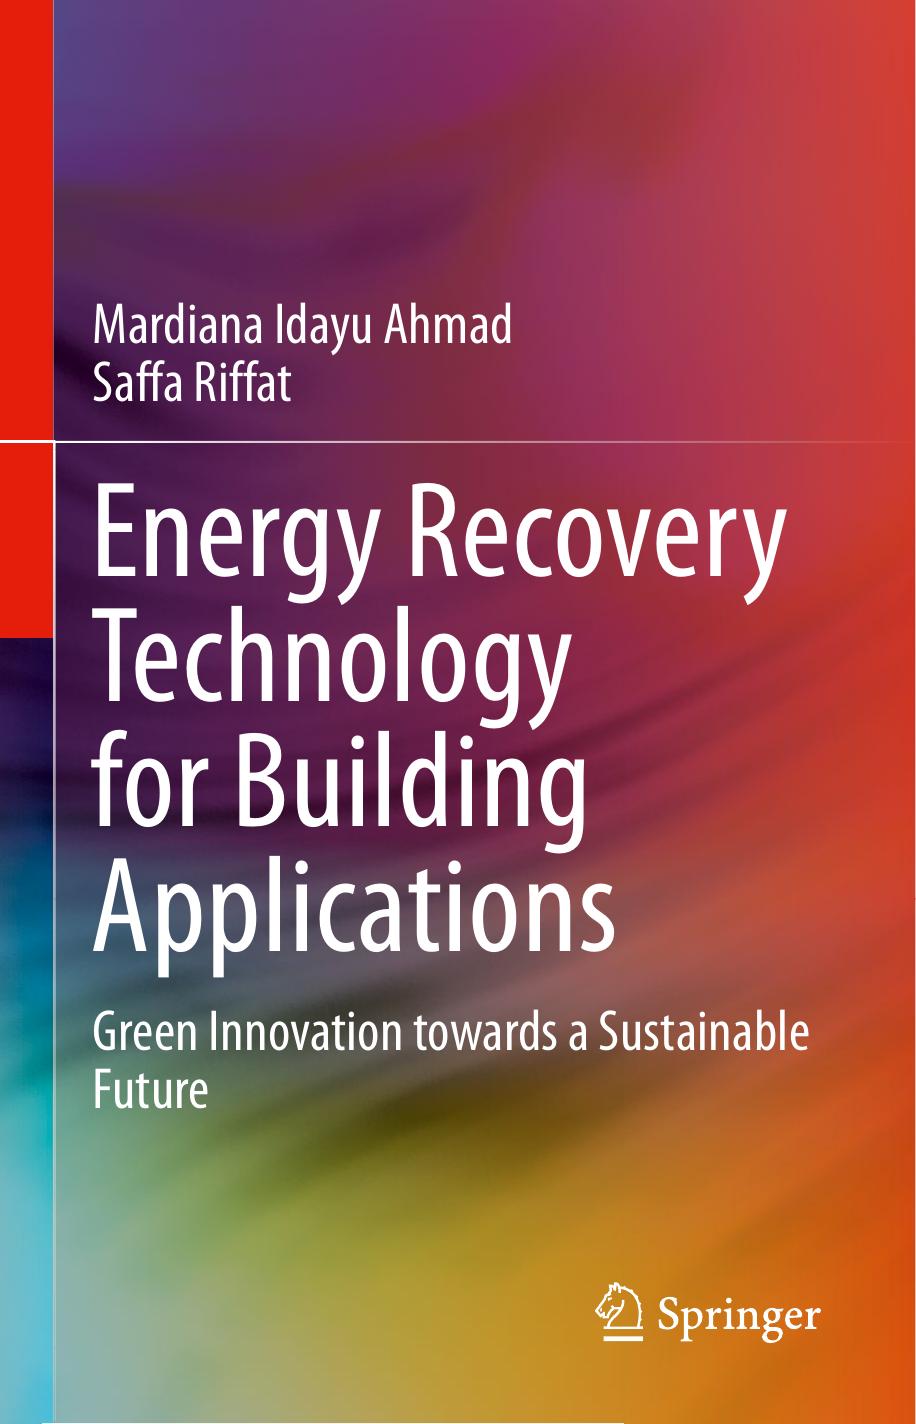 Energy Recovery Technology for Building Applications  Green Innovation towards a Sustainable Future, (2020)